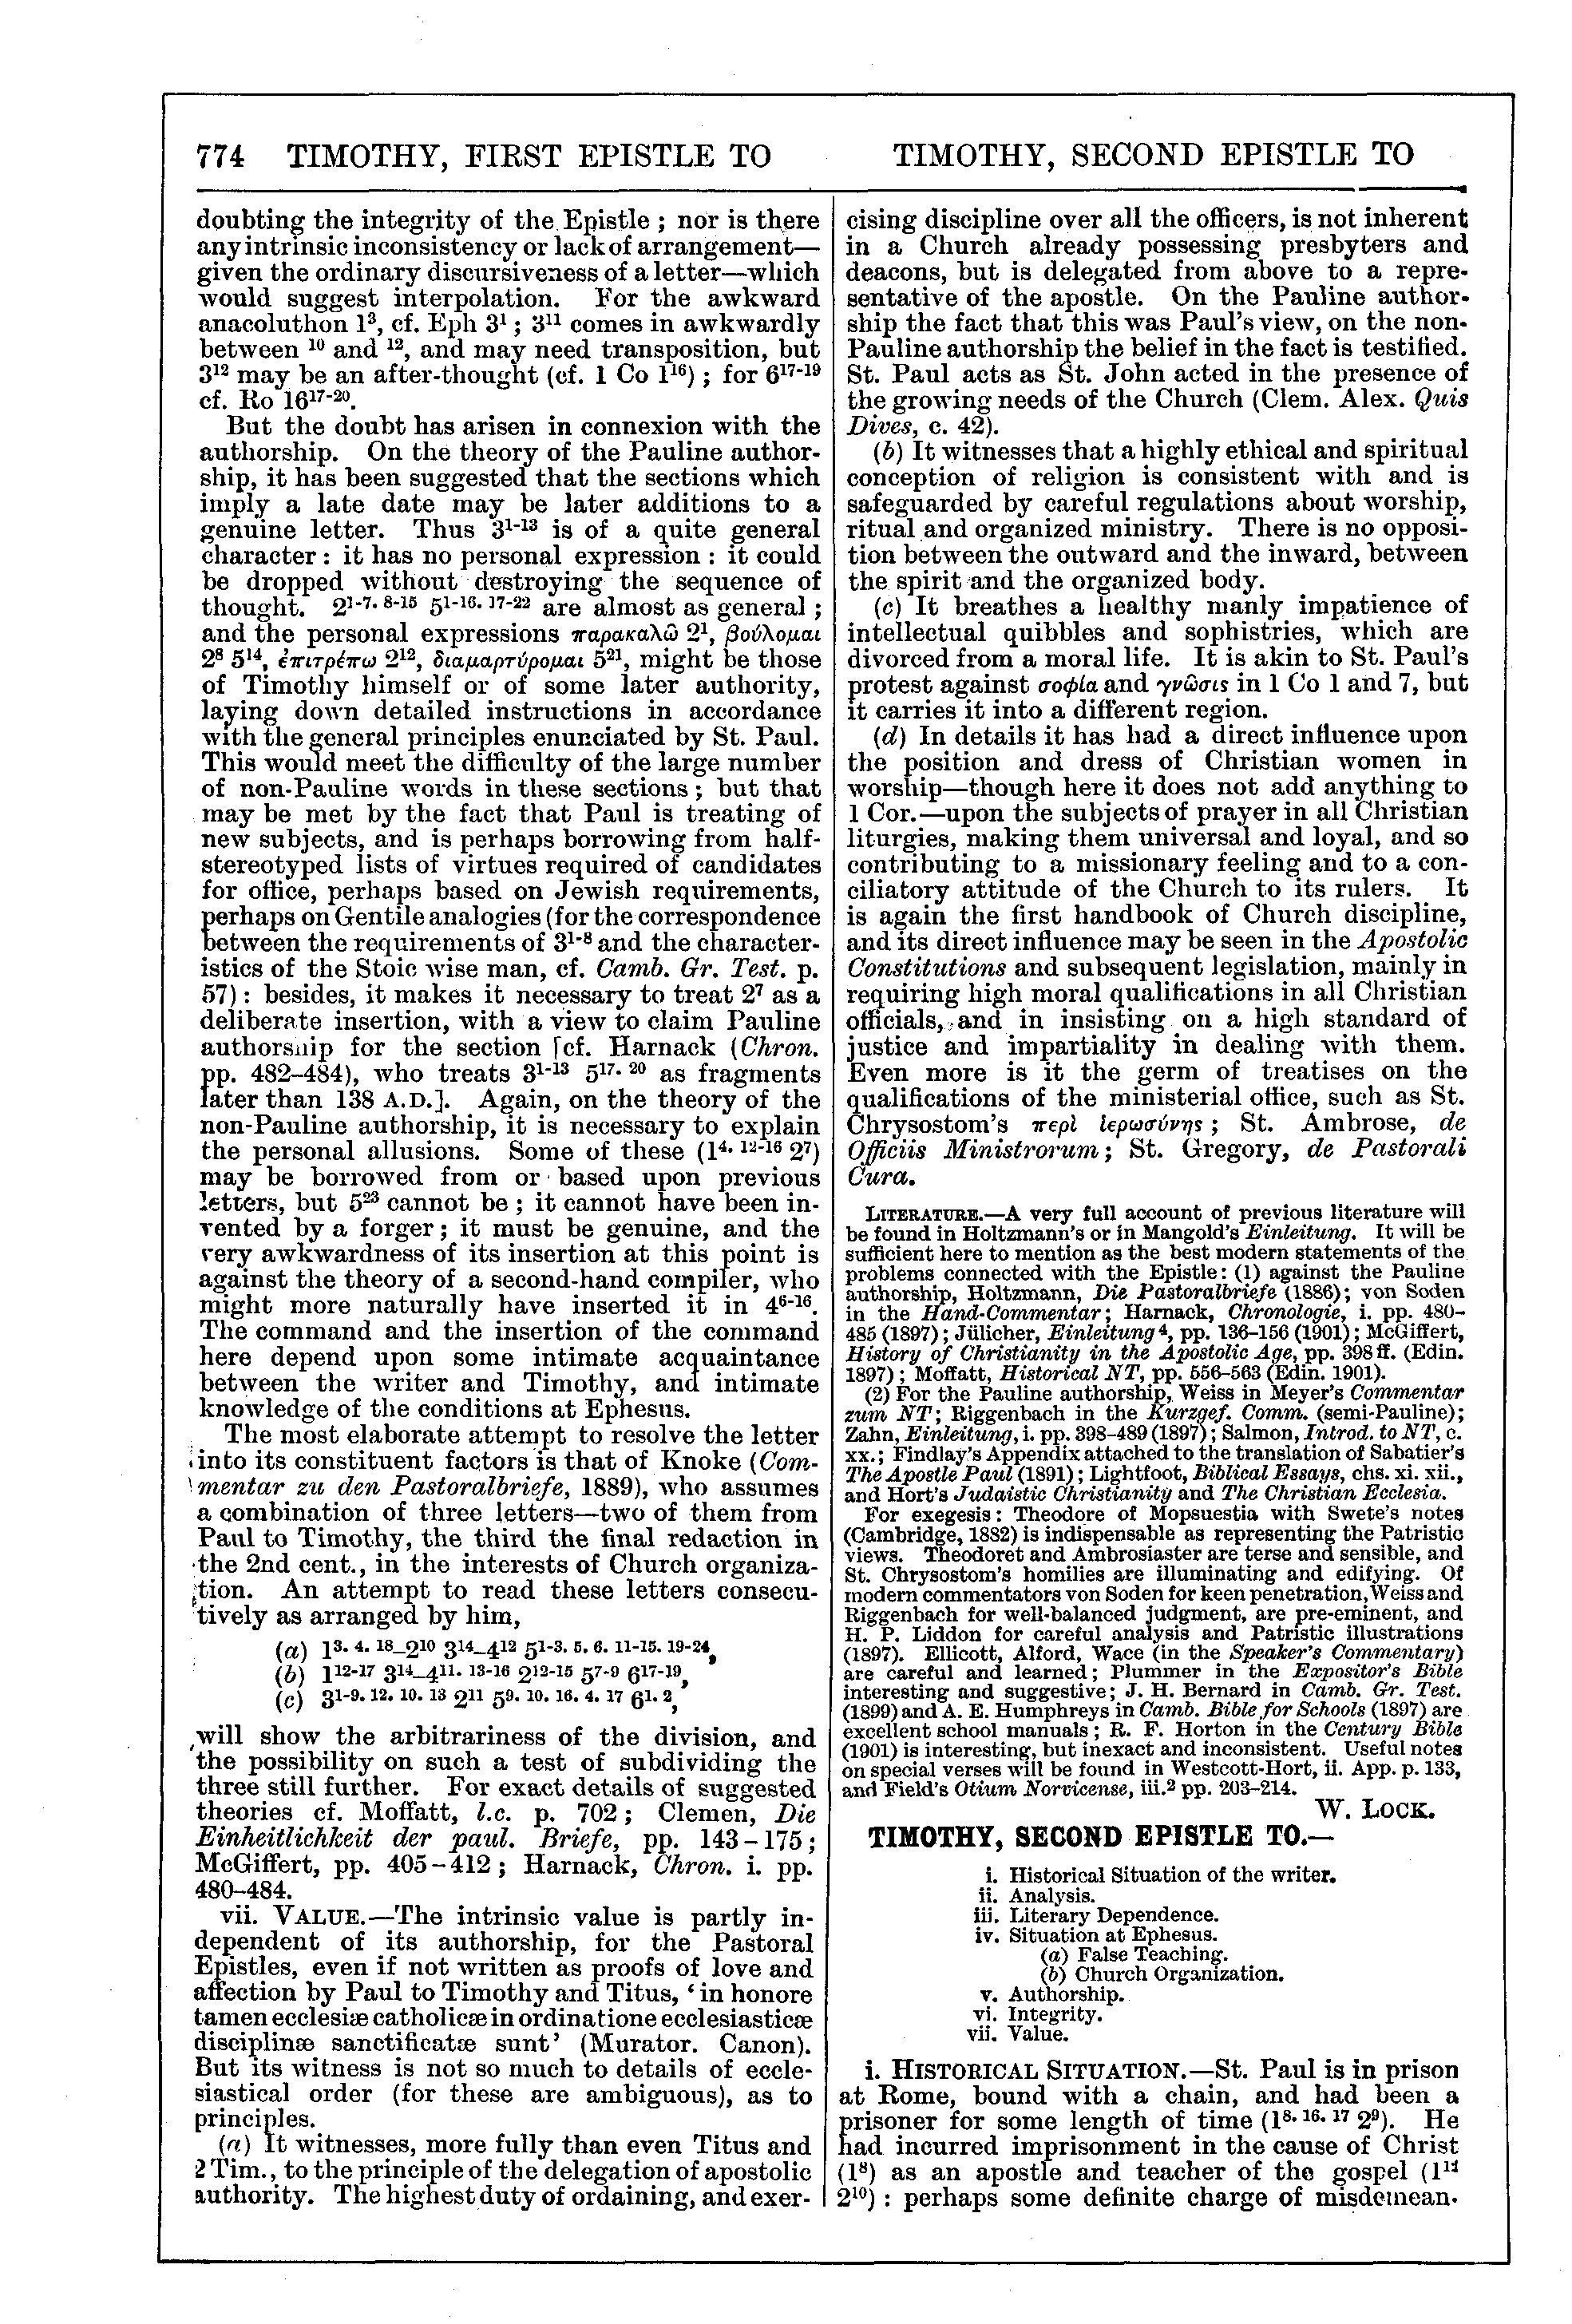 Image of page 774